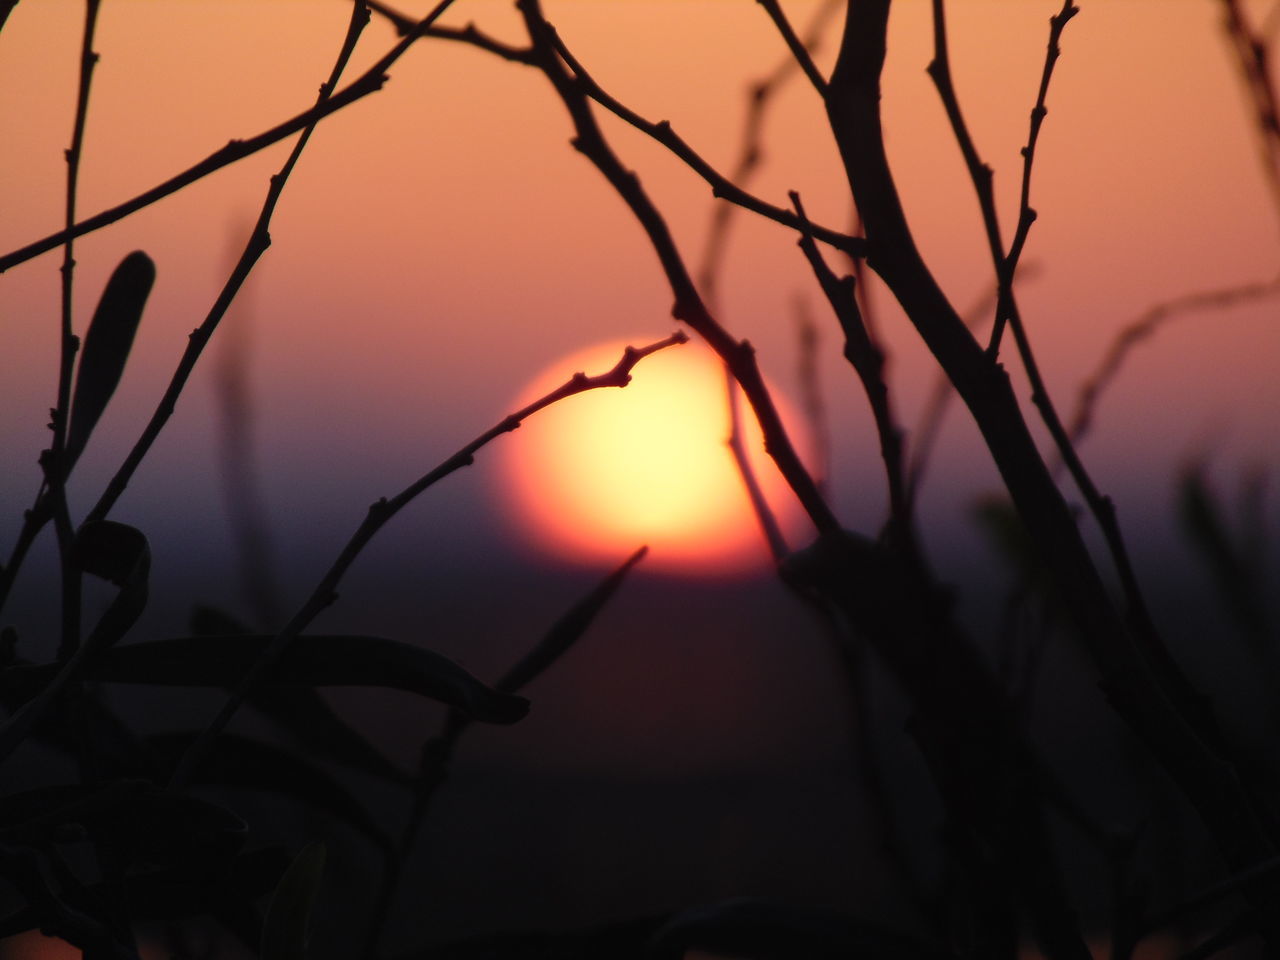 sunset, sun, orange color, beauty in nature, nature, silhouette, scenics, no people, outdoors, sky, tranquil scene, focus on foreground, tree, sunlight, close-up, branch, day